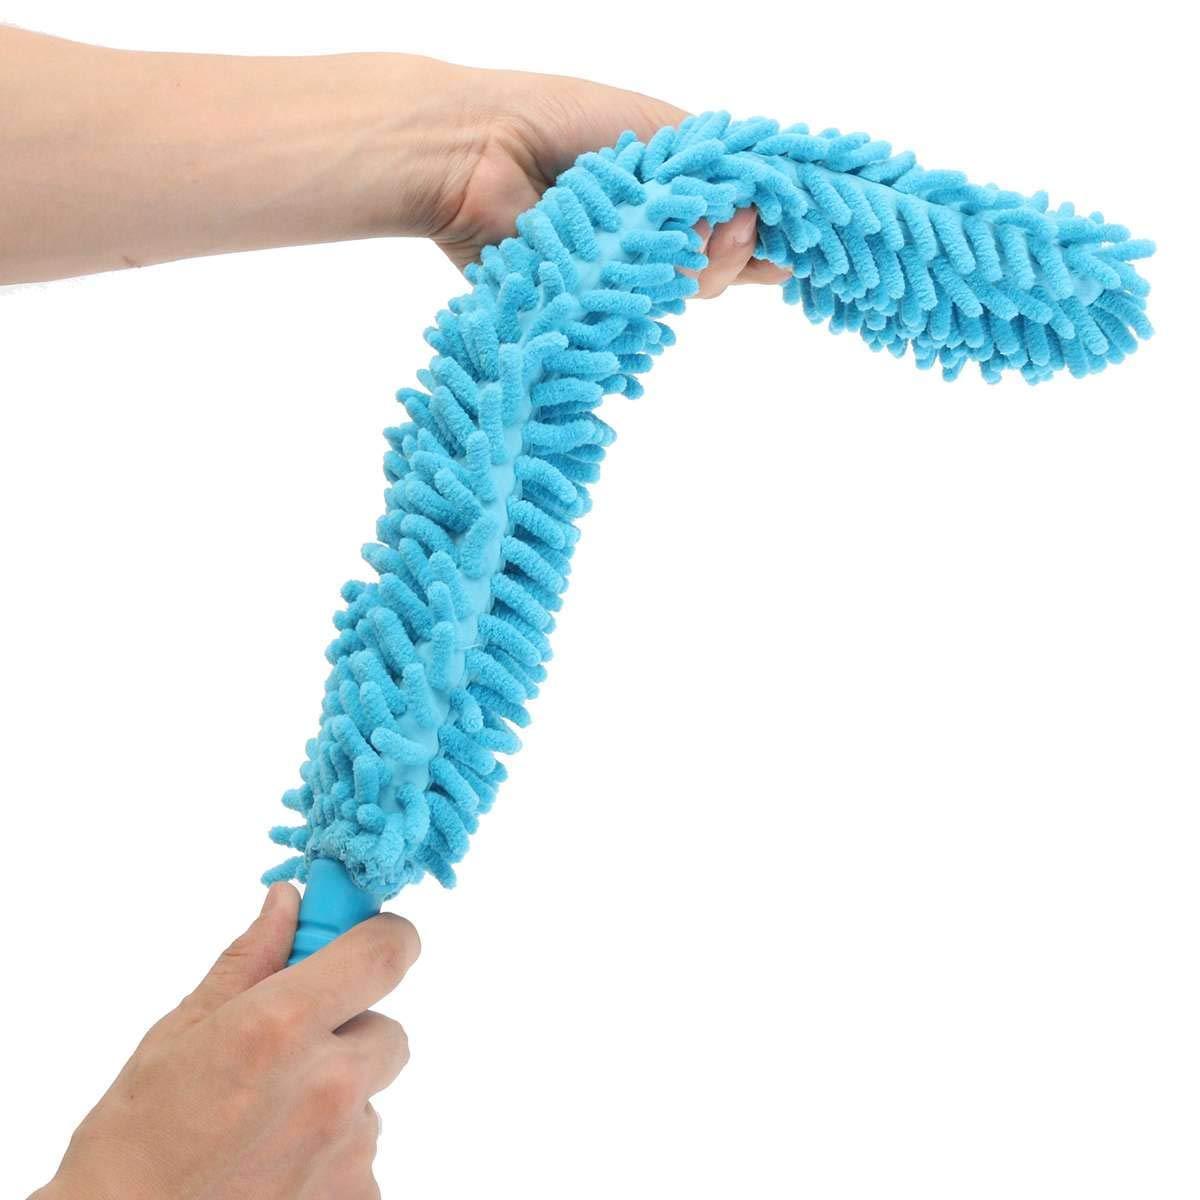 Fan Duster - Flexible Microfiber Cleaning Duster with Extendable Rod